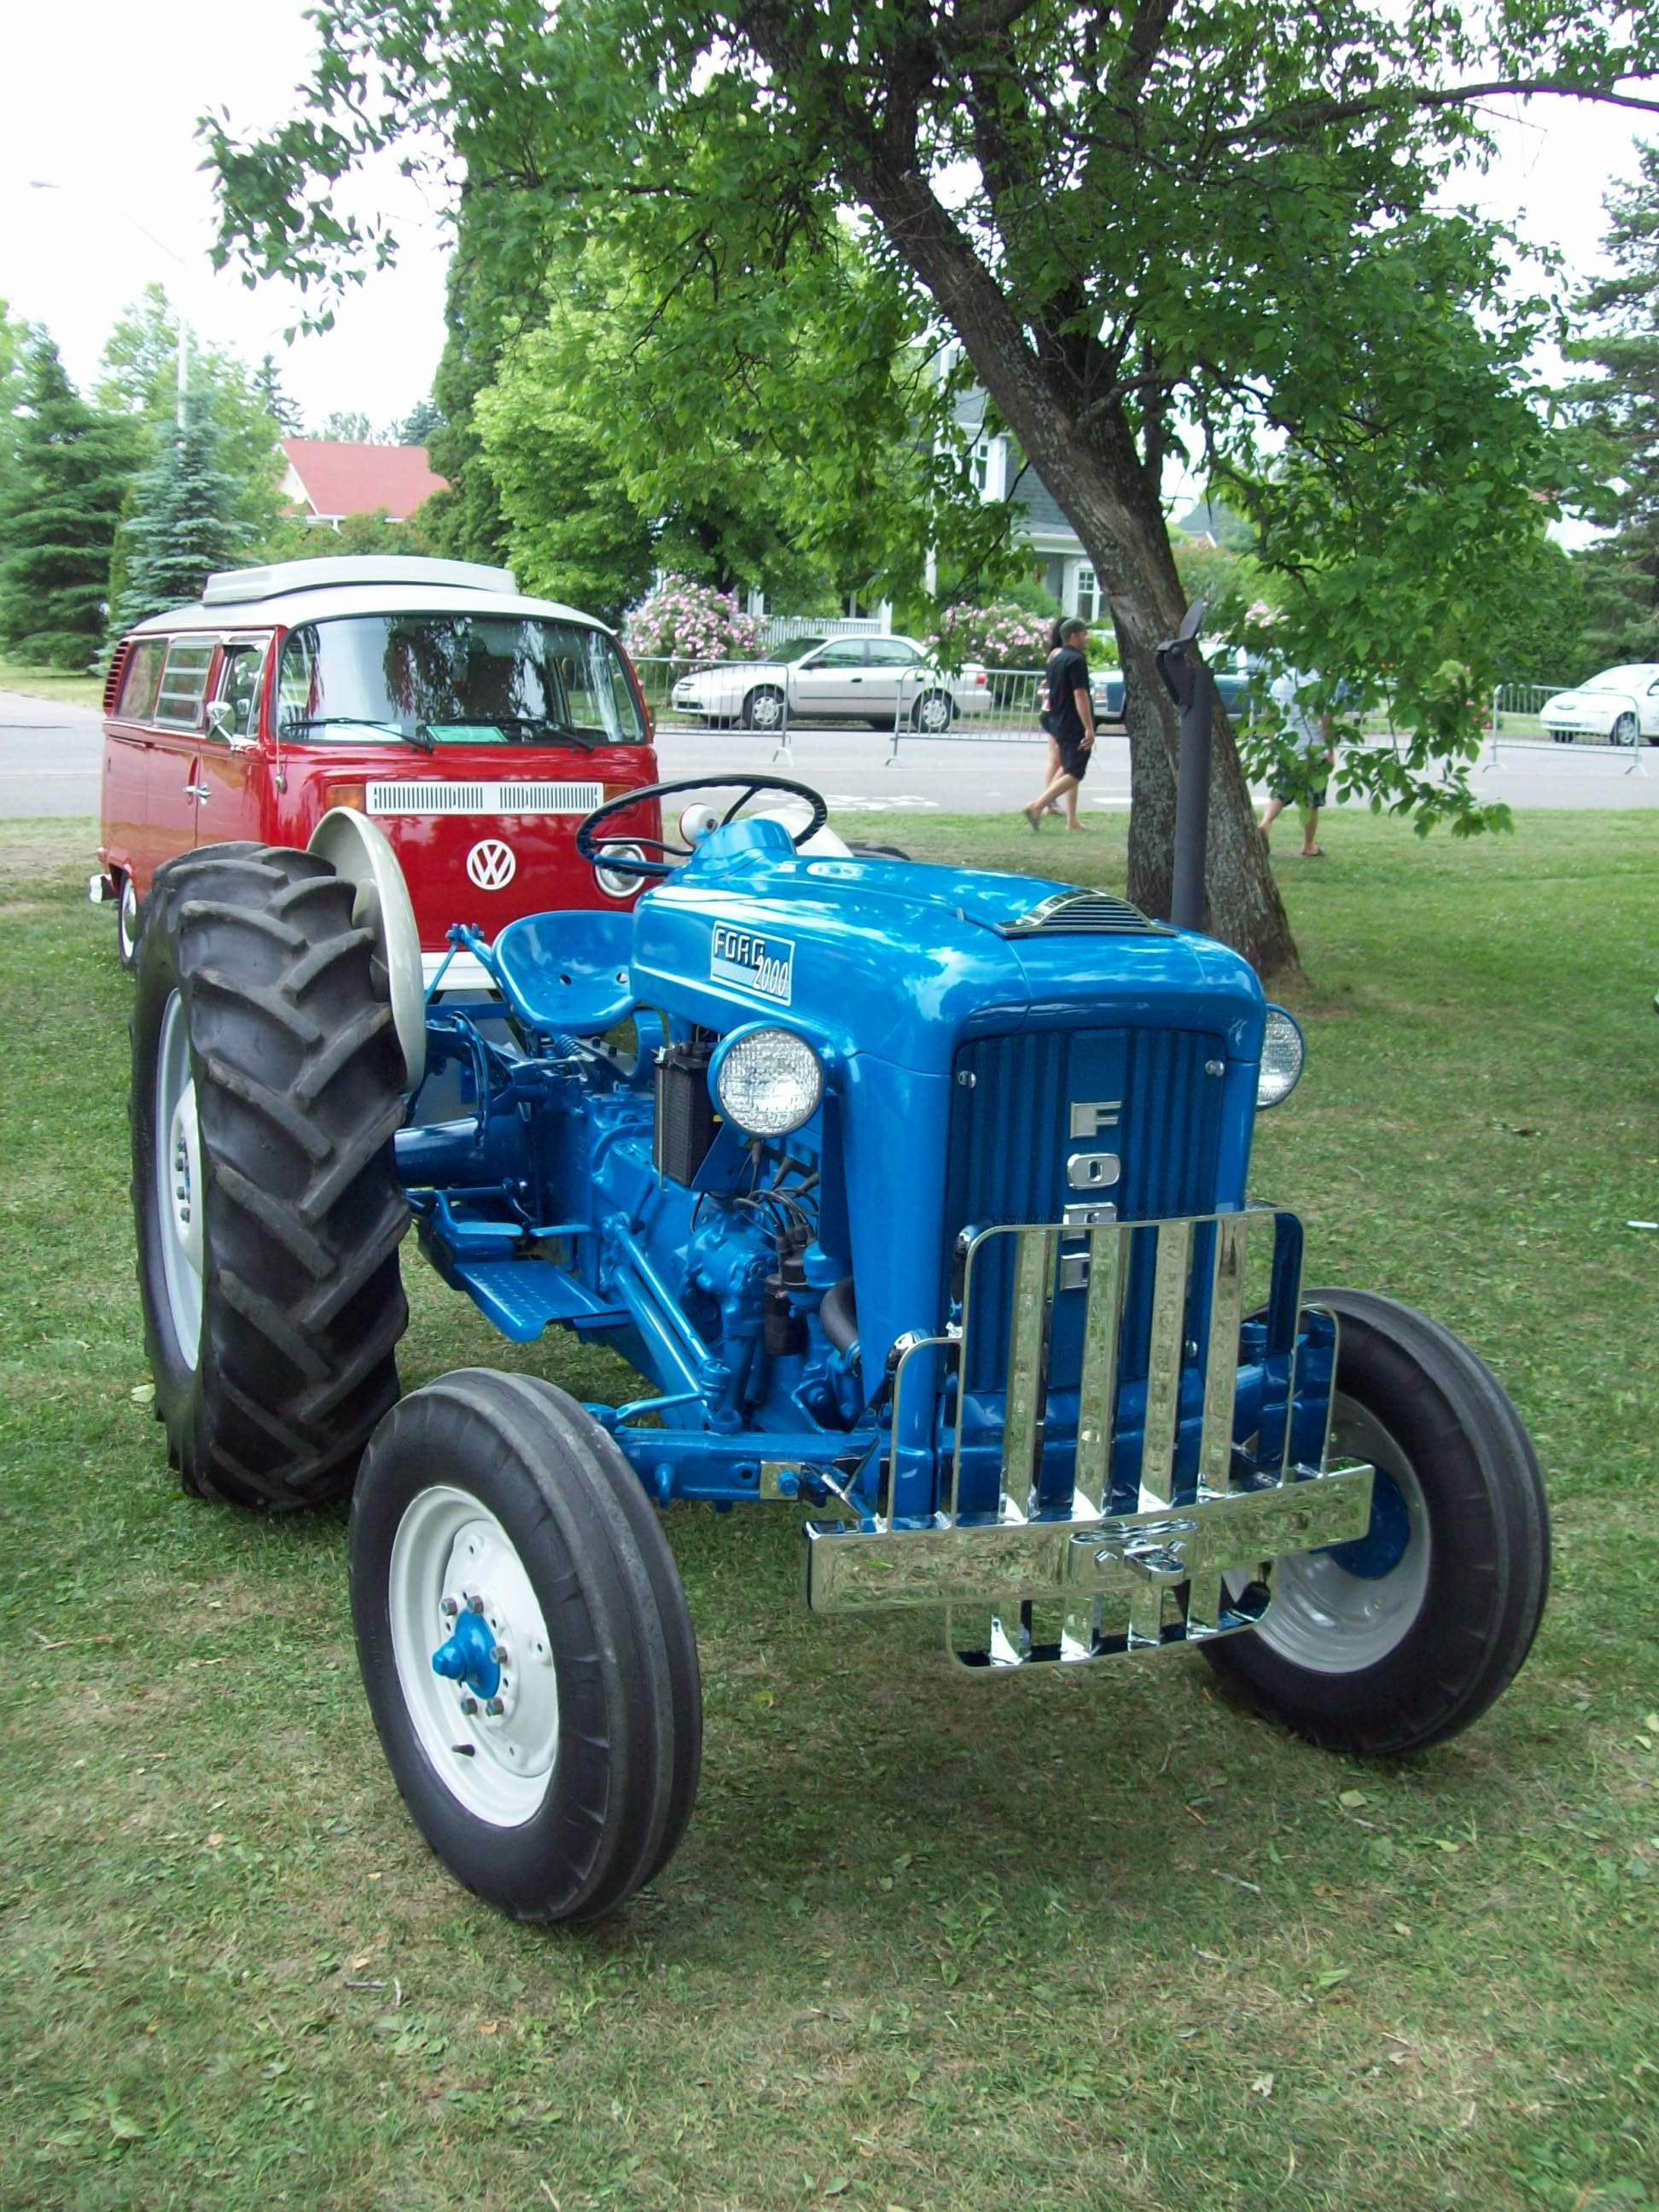 What is the horsepower of a ford 2000 tractor #1